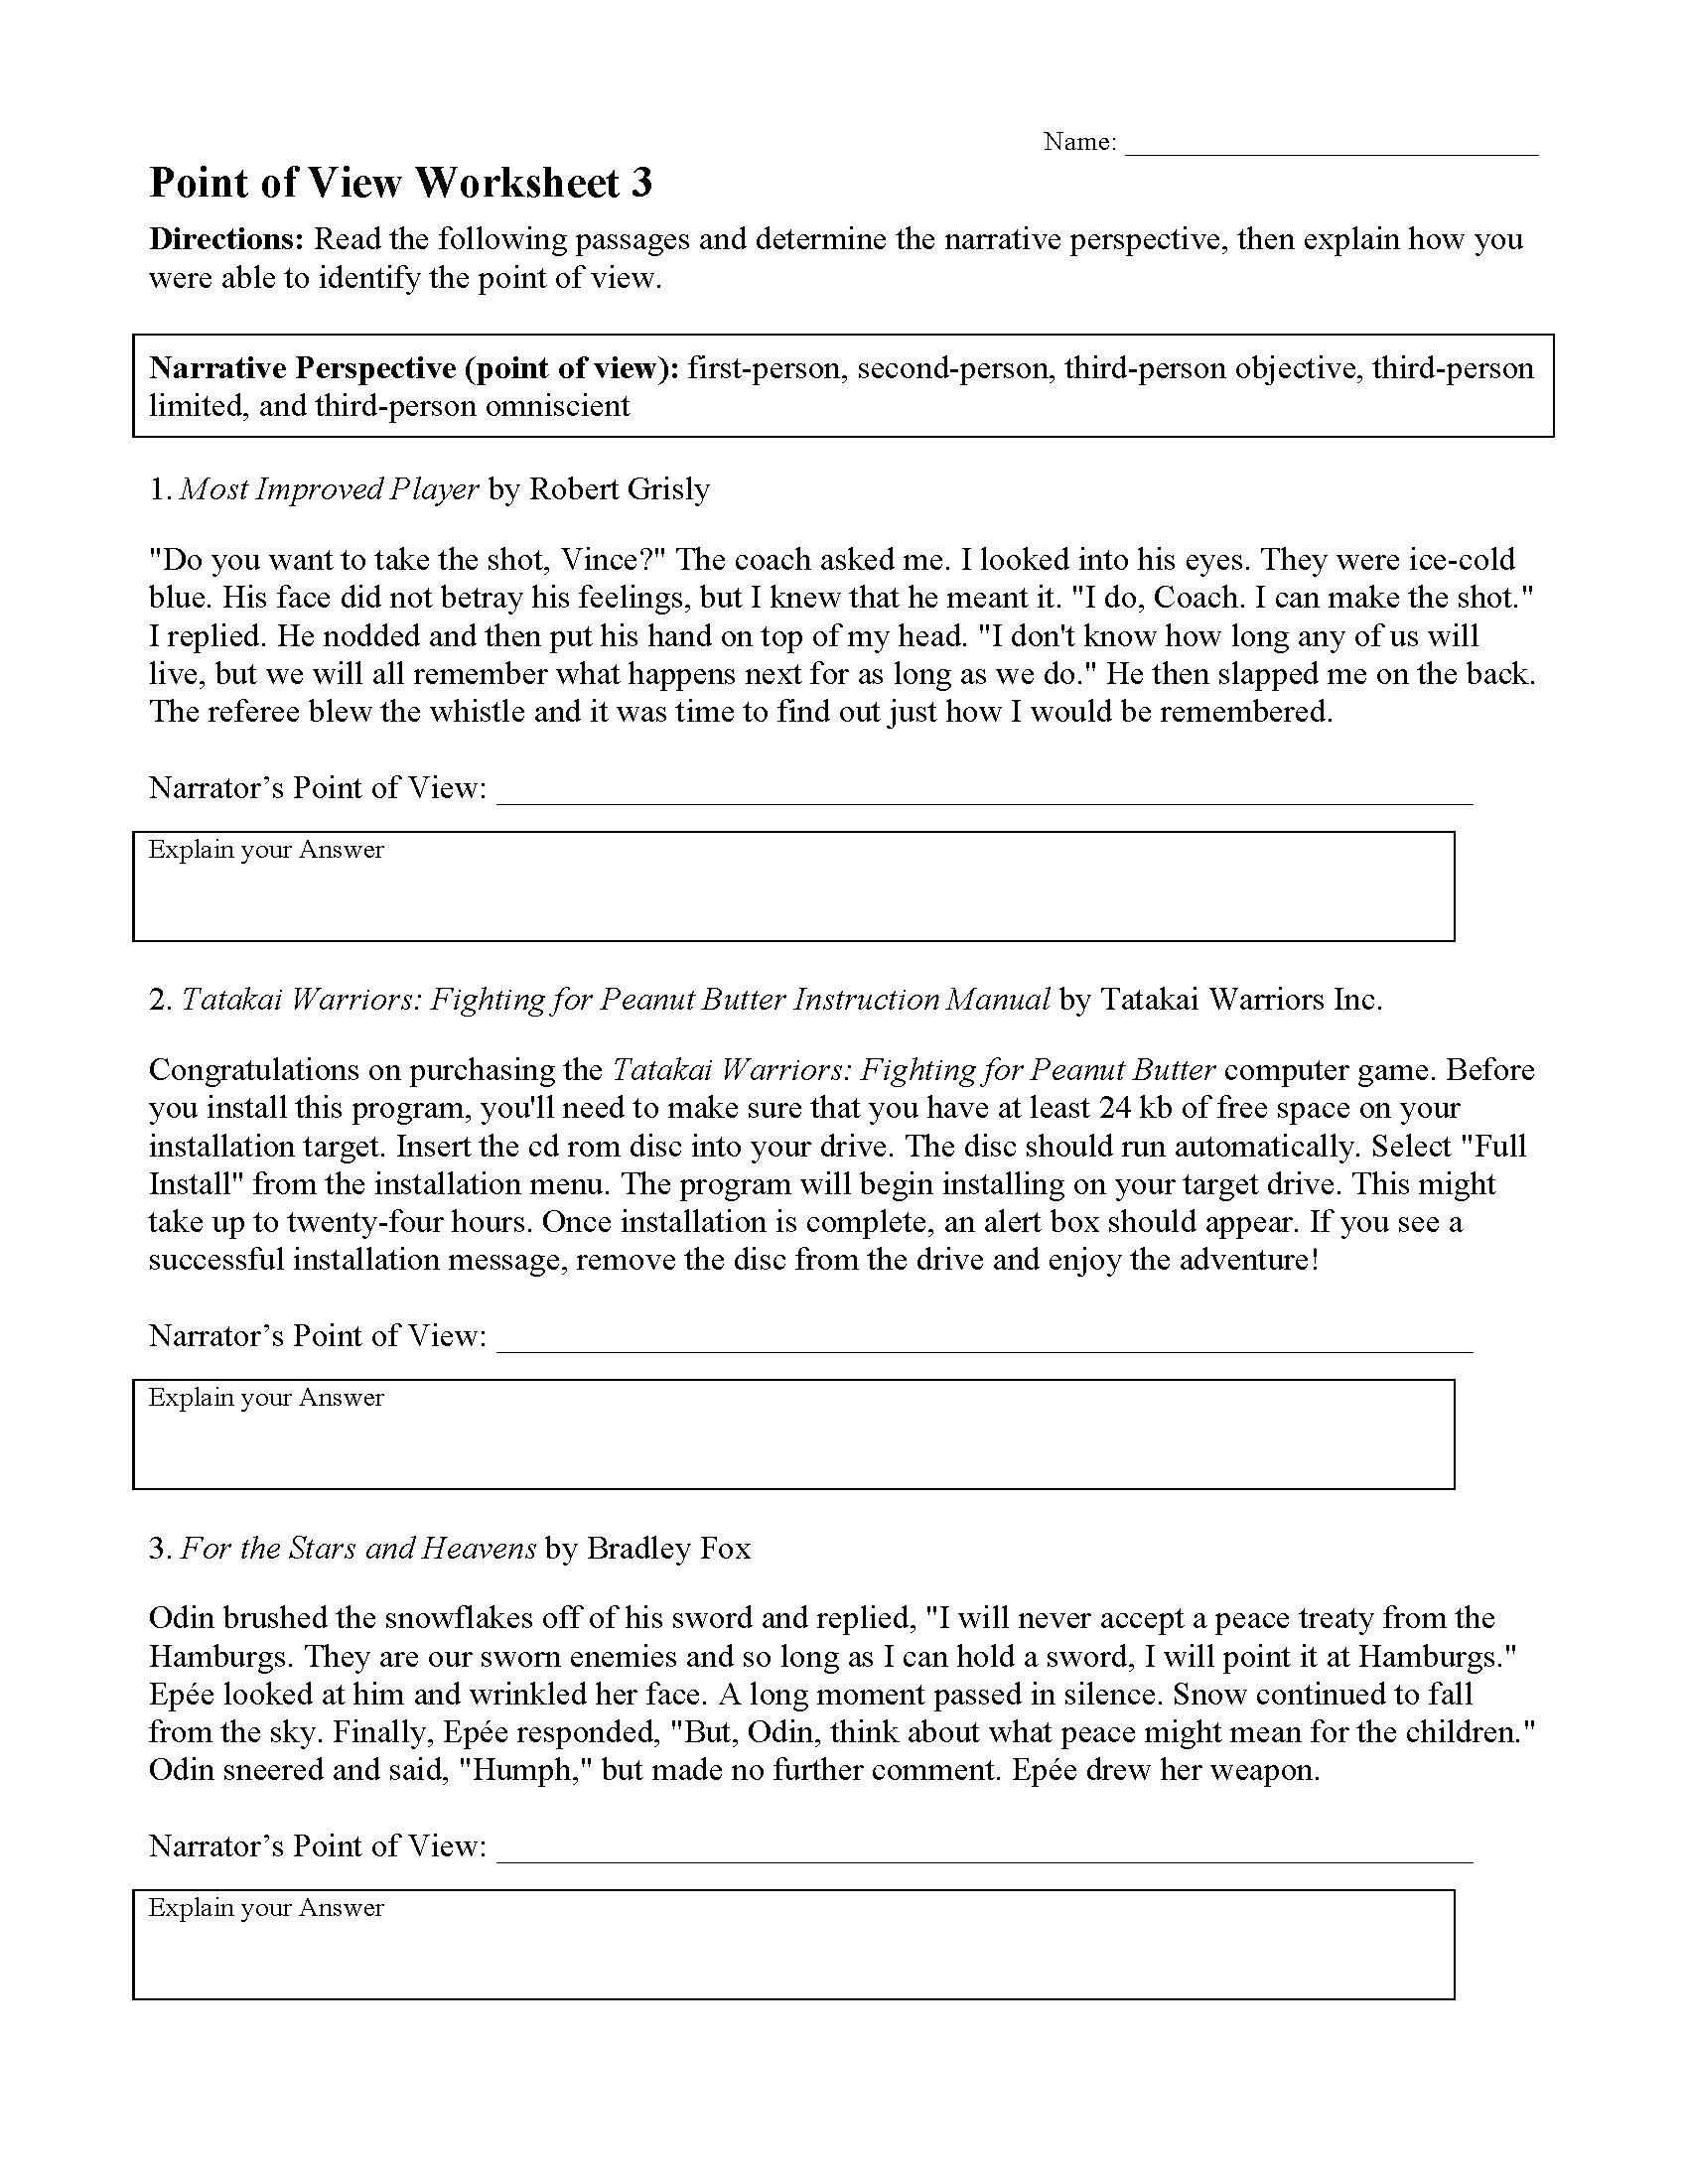 A Letter To Home Point Of View Worksheet